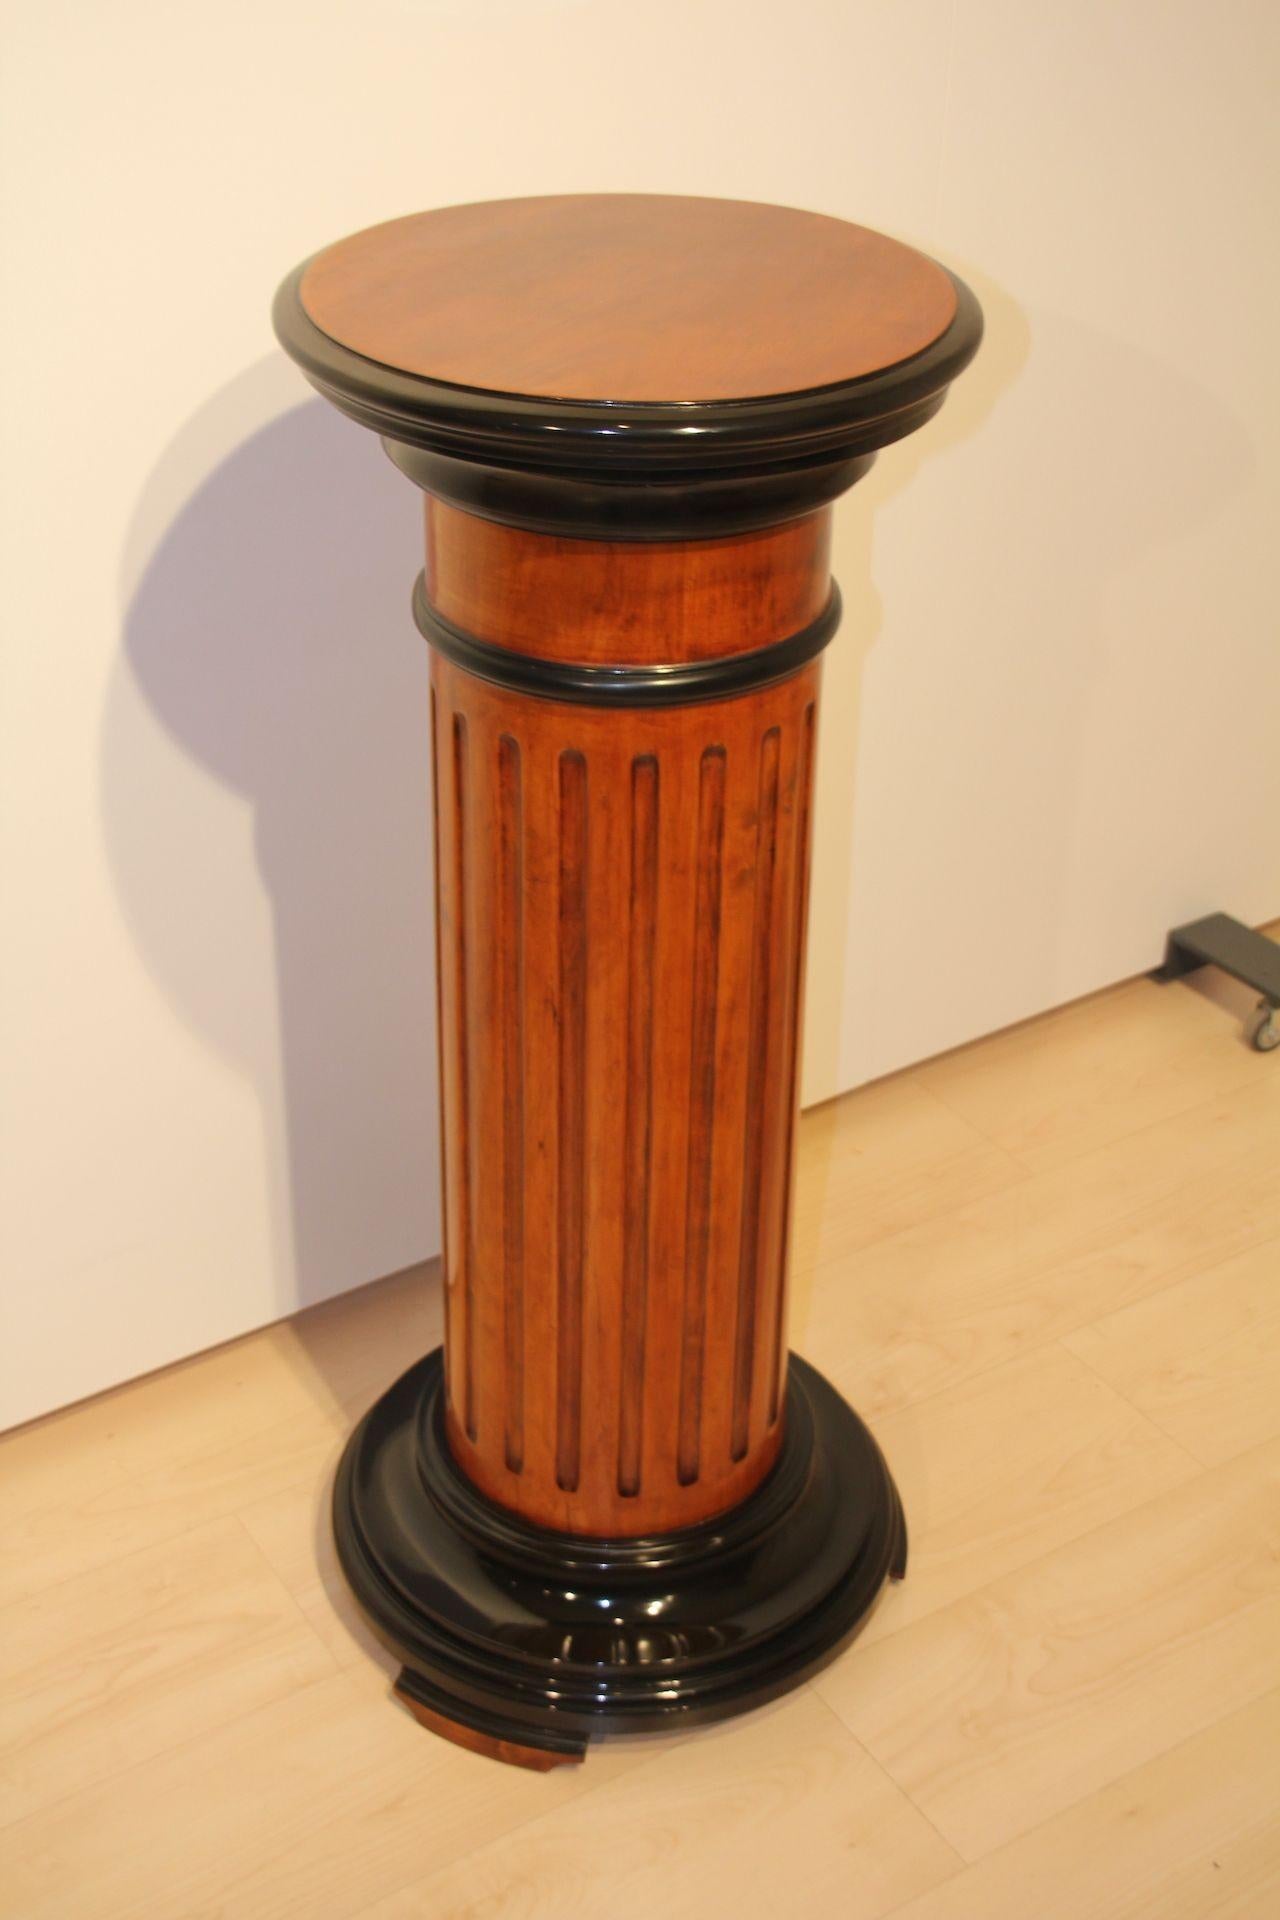 Neoclassical Rotating Pedestal, Beech Wood, French Polished, Germany, Circa 1920 For Sale 1